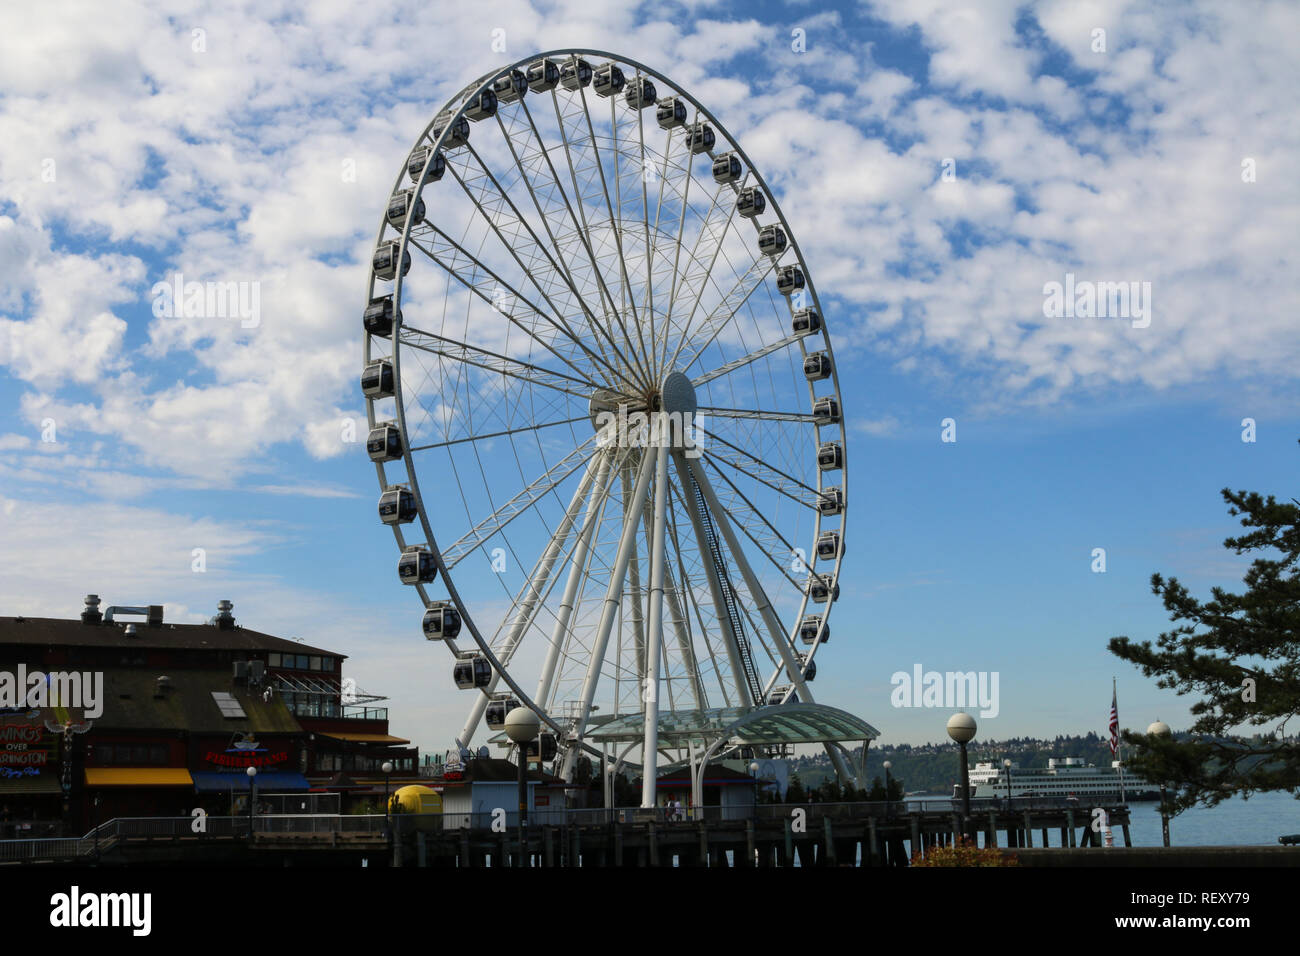 Seattle Big Wheel jumbo ferris wheel on the pier on a partly cloudy day Stock Photo